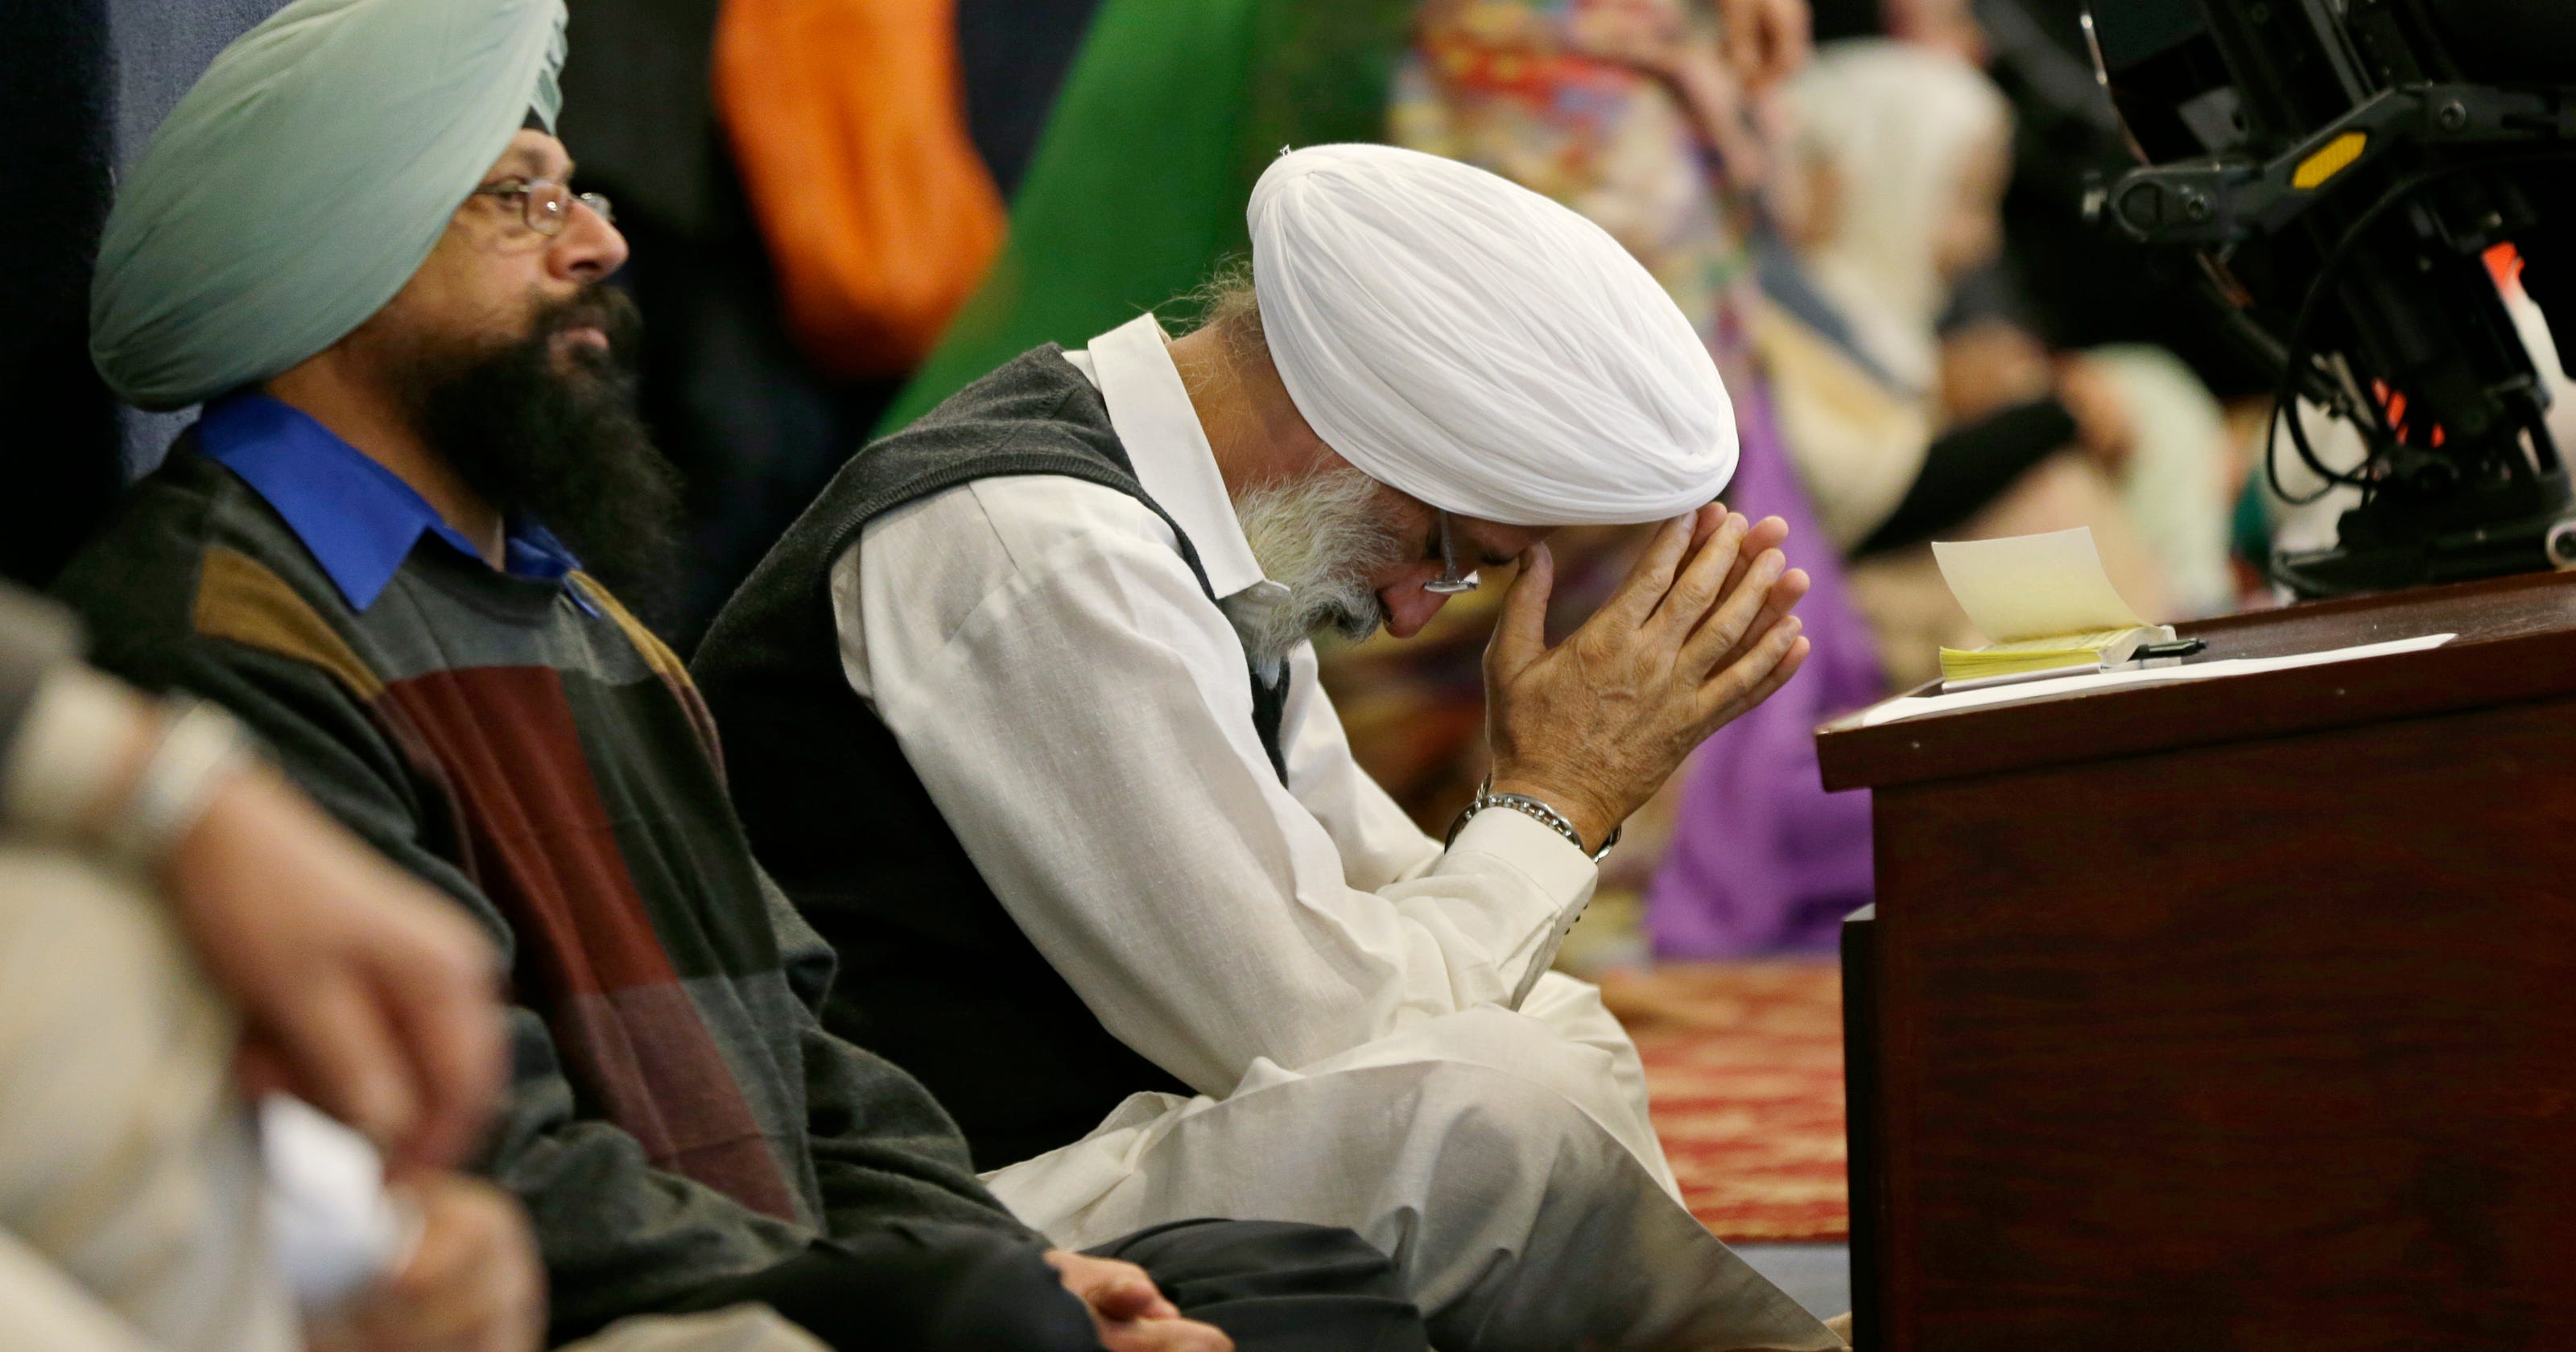 Sikhs Nationwide Are Opening Their Temples To Dispel Myths About Turbans